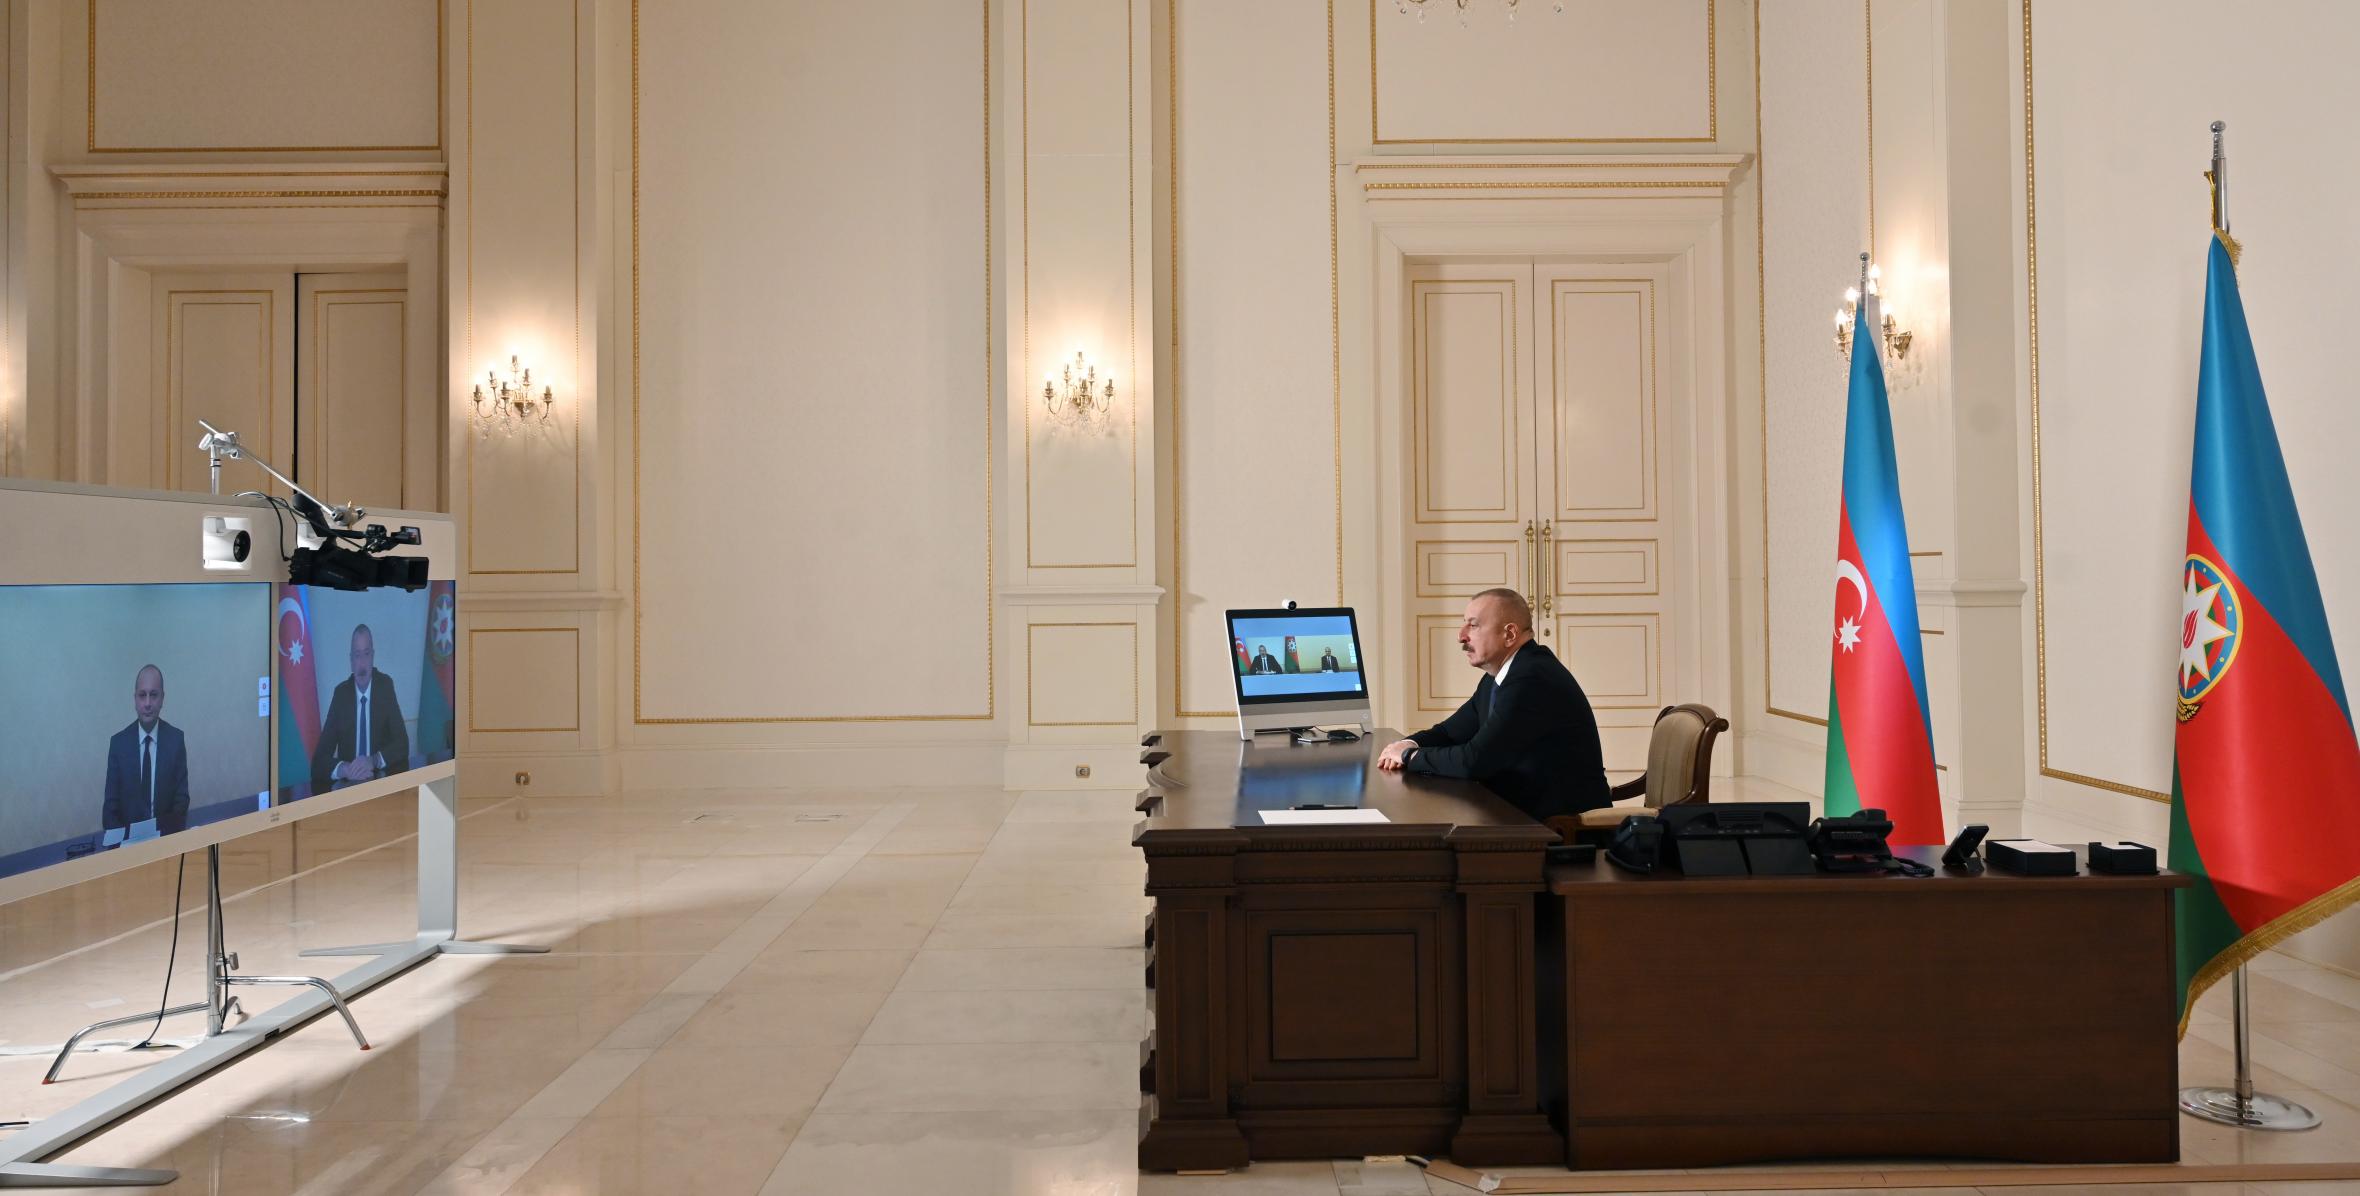 Ilham Aliyev received in a video format Vugar Suleymanov on his appointment as Chairman of Board of Agency for Mine Action